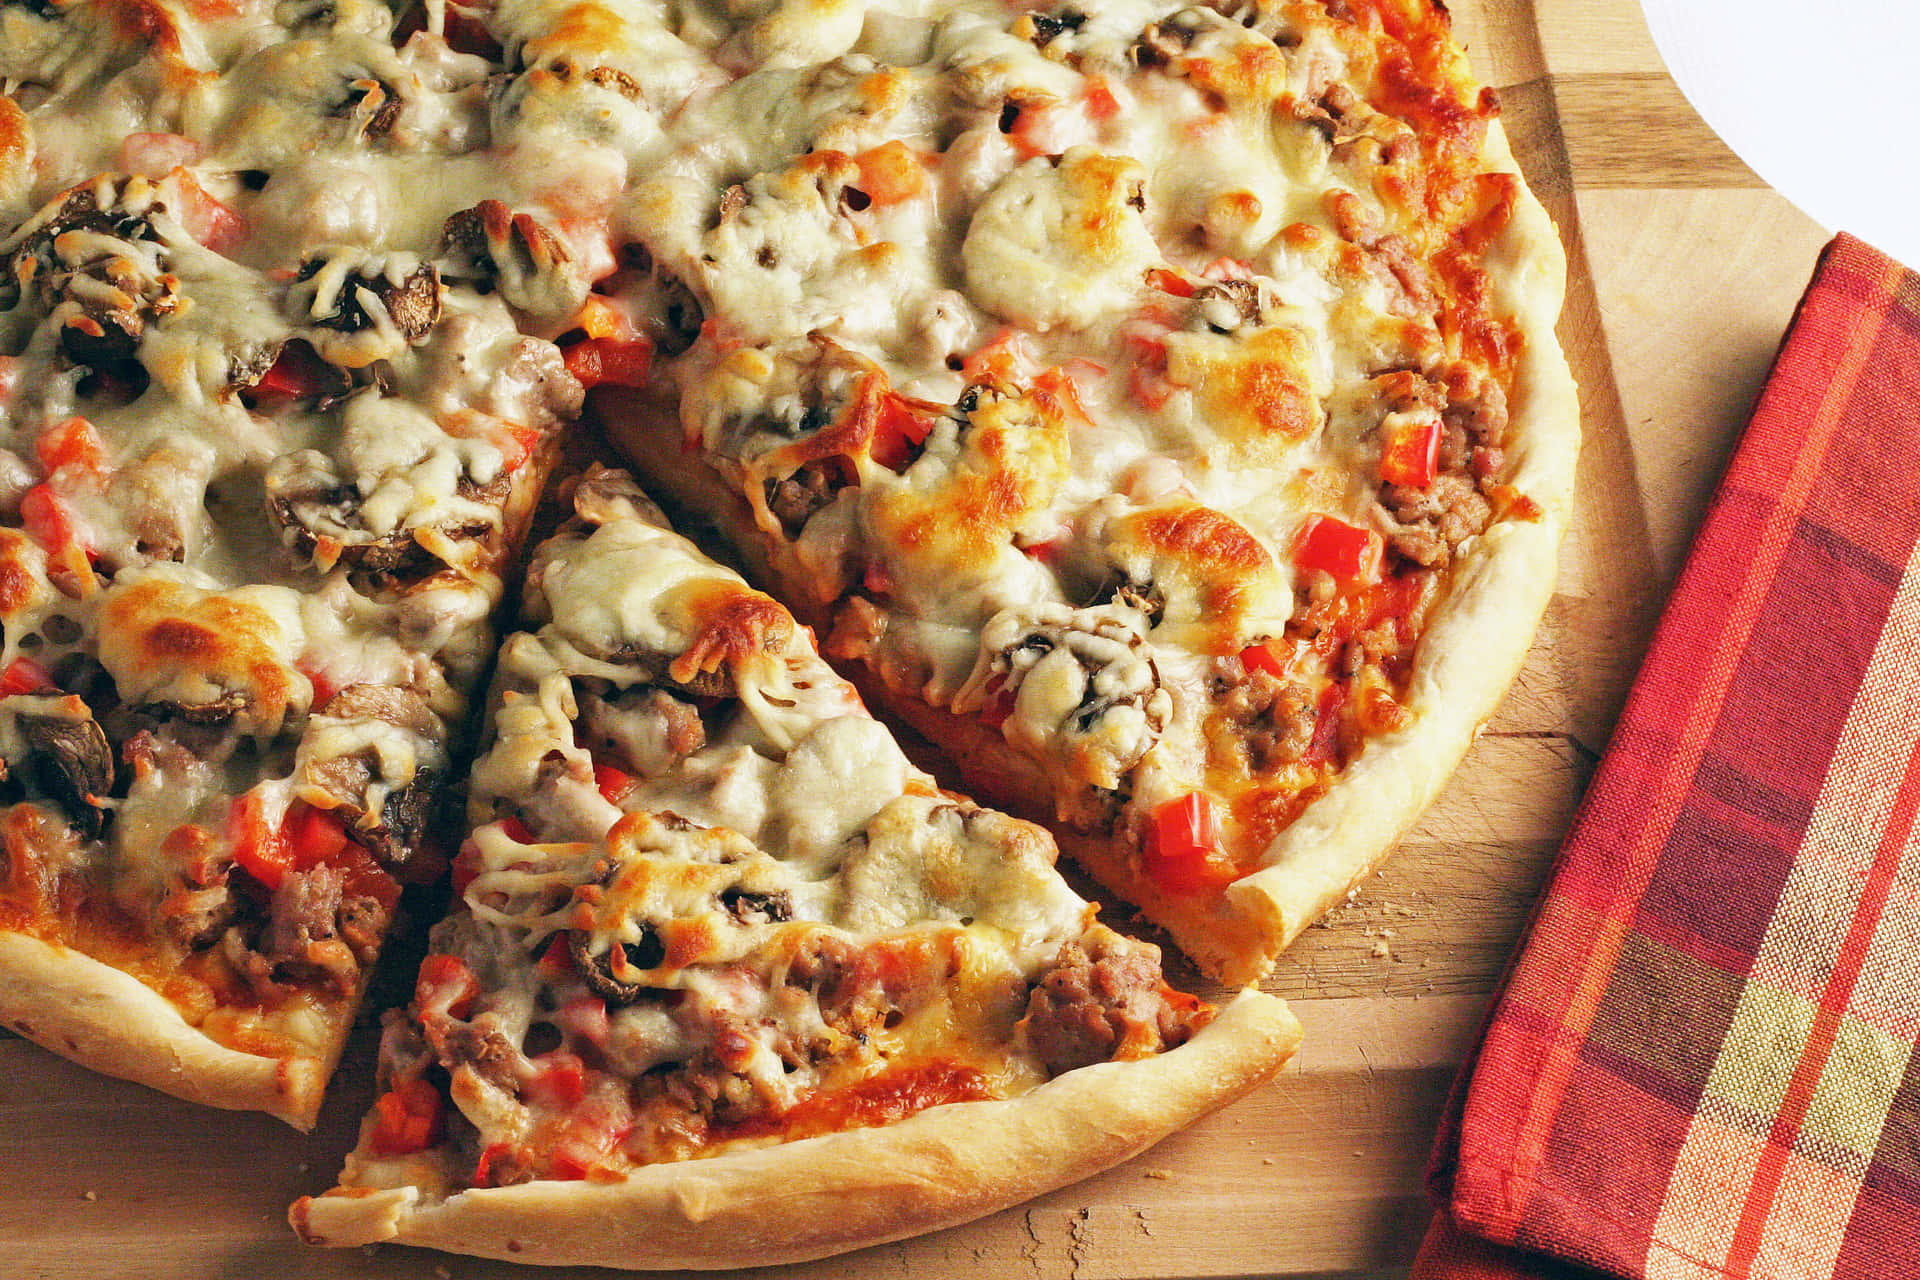 Enjoy a wood-fired pizza for a truly delicious experience.